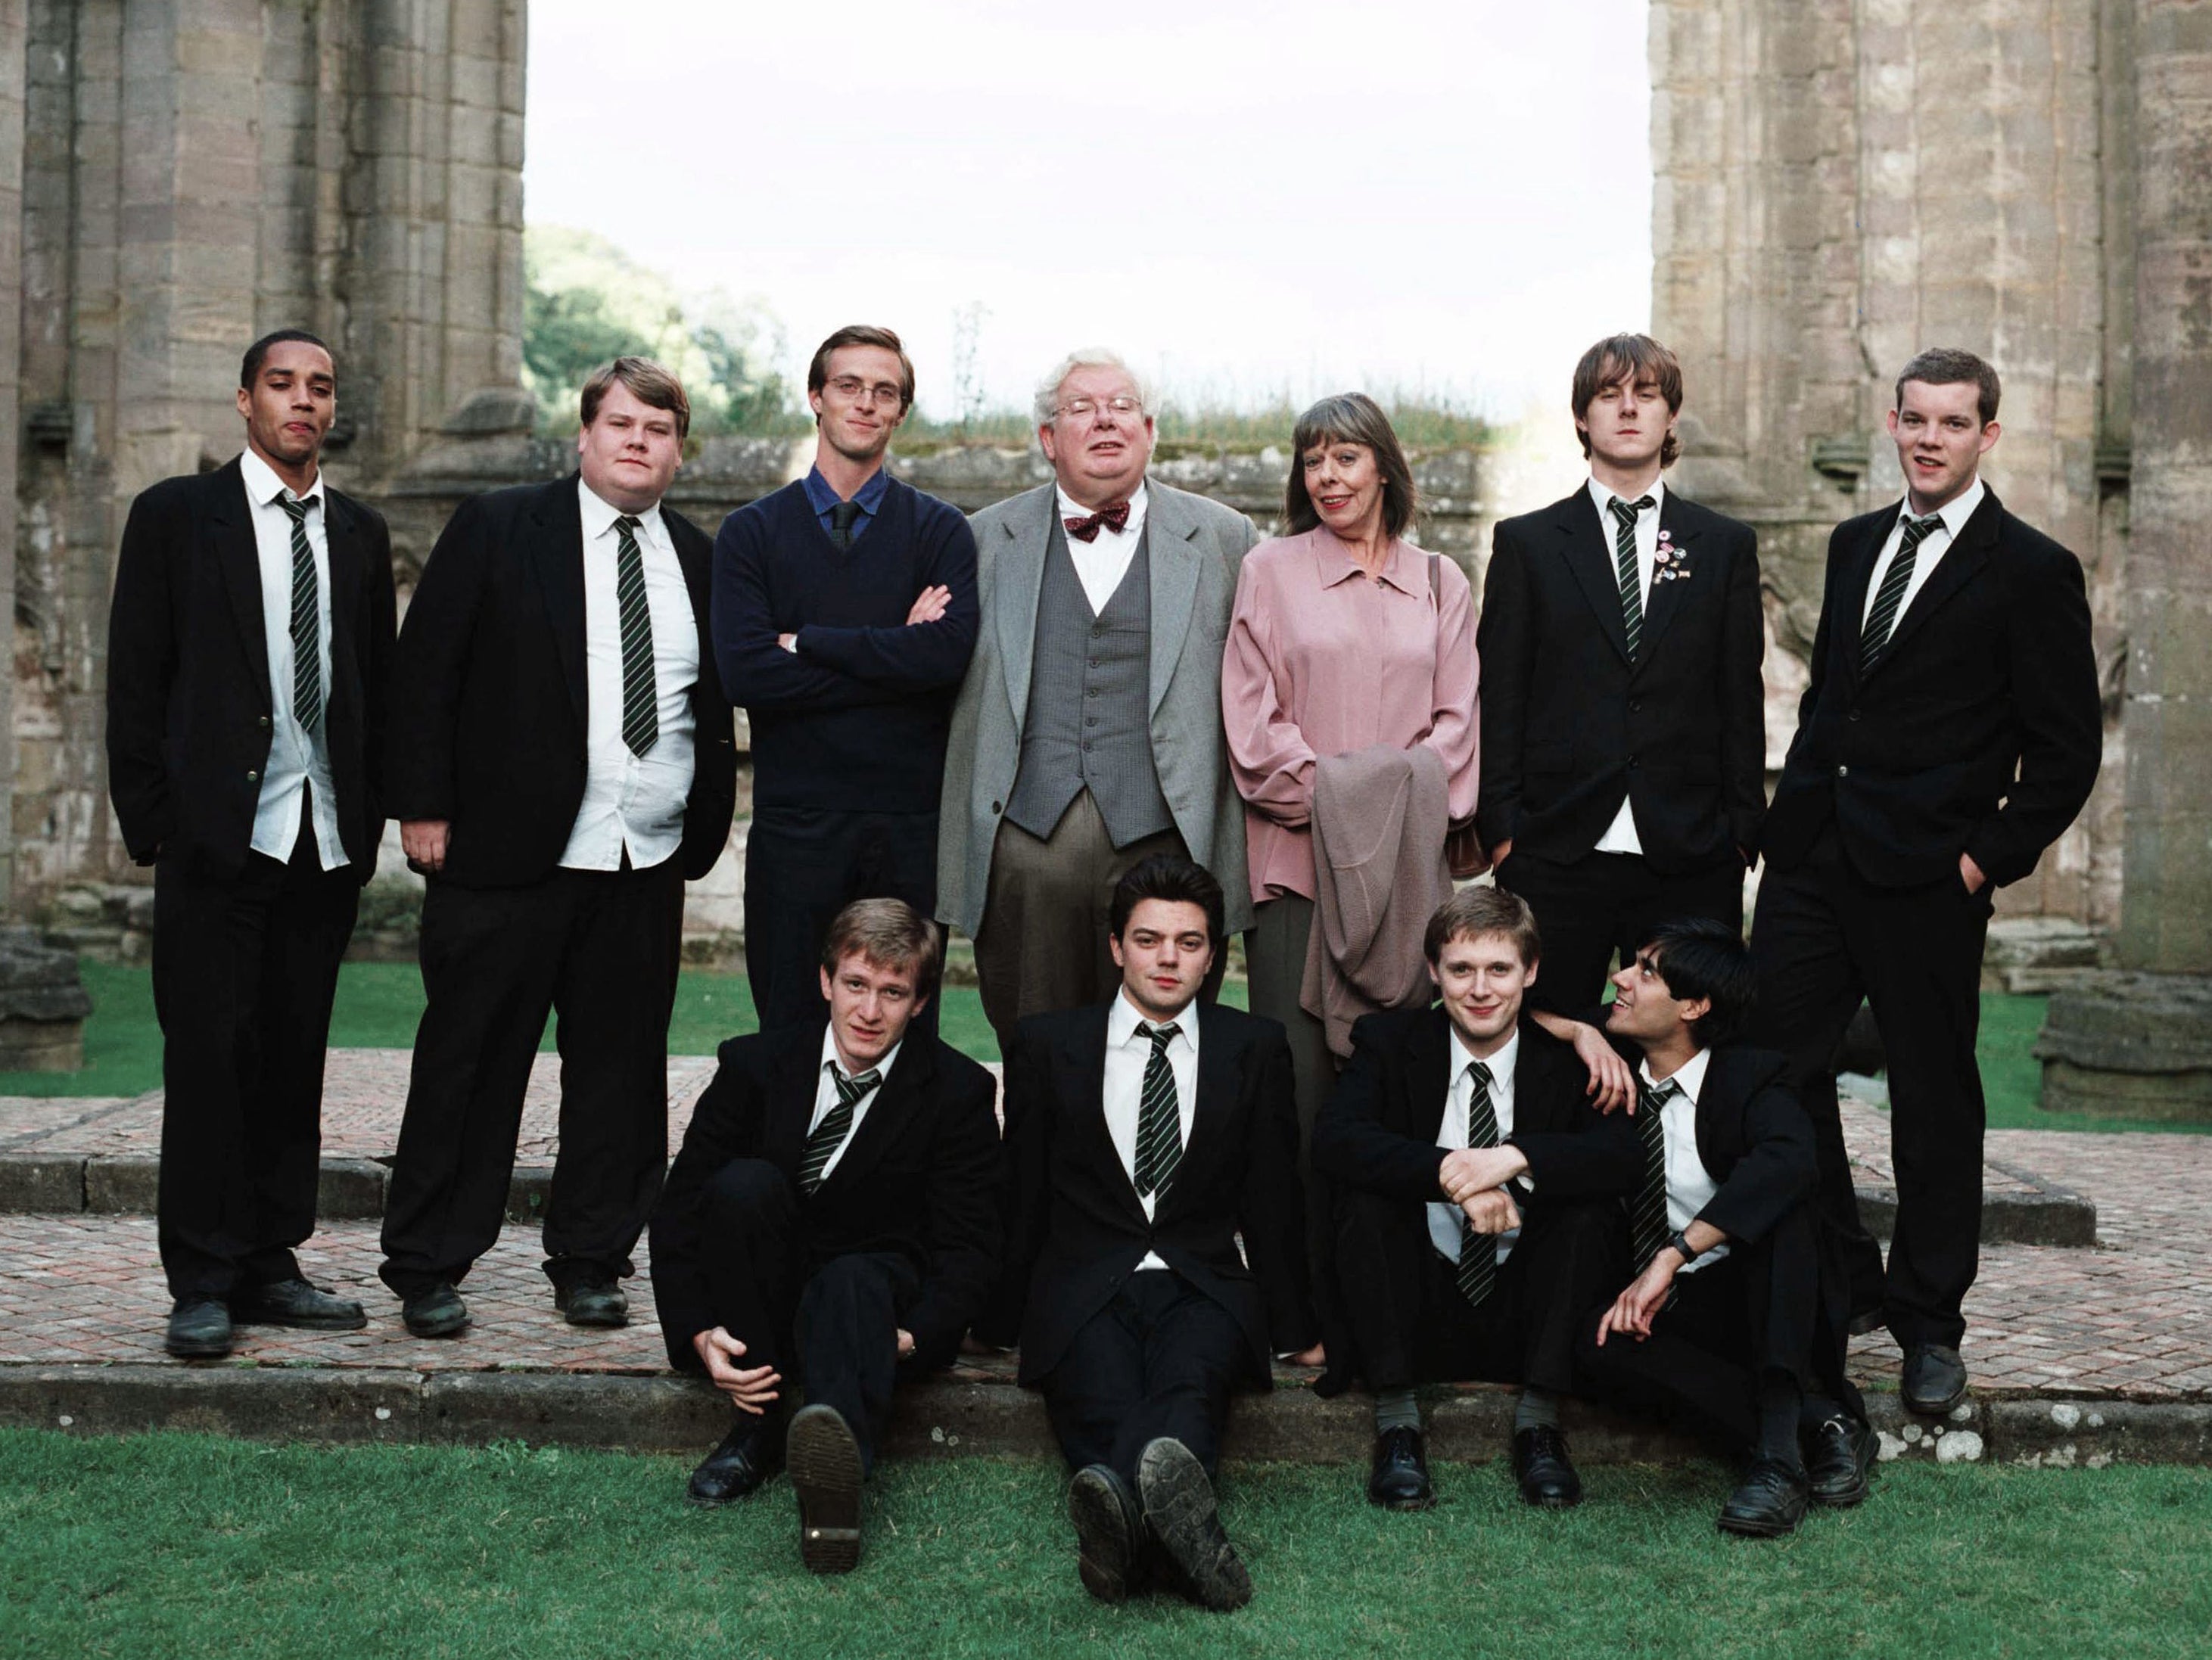 De la Tour with the film cast of ‘The History Boys’, including the late Richard Griffiths, Russell Tovey (far right), Dominic Cooper (front centre) and James Corden, back row, second from left